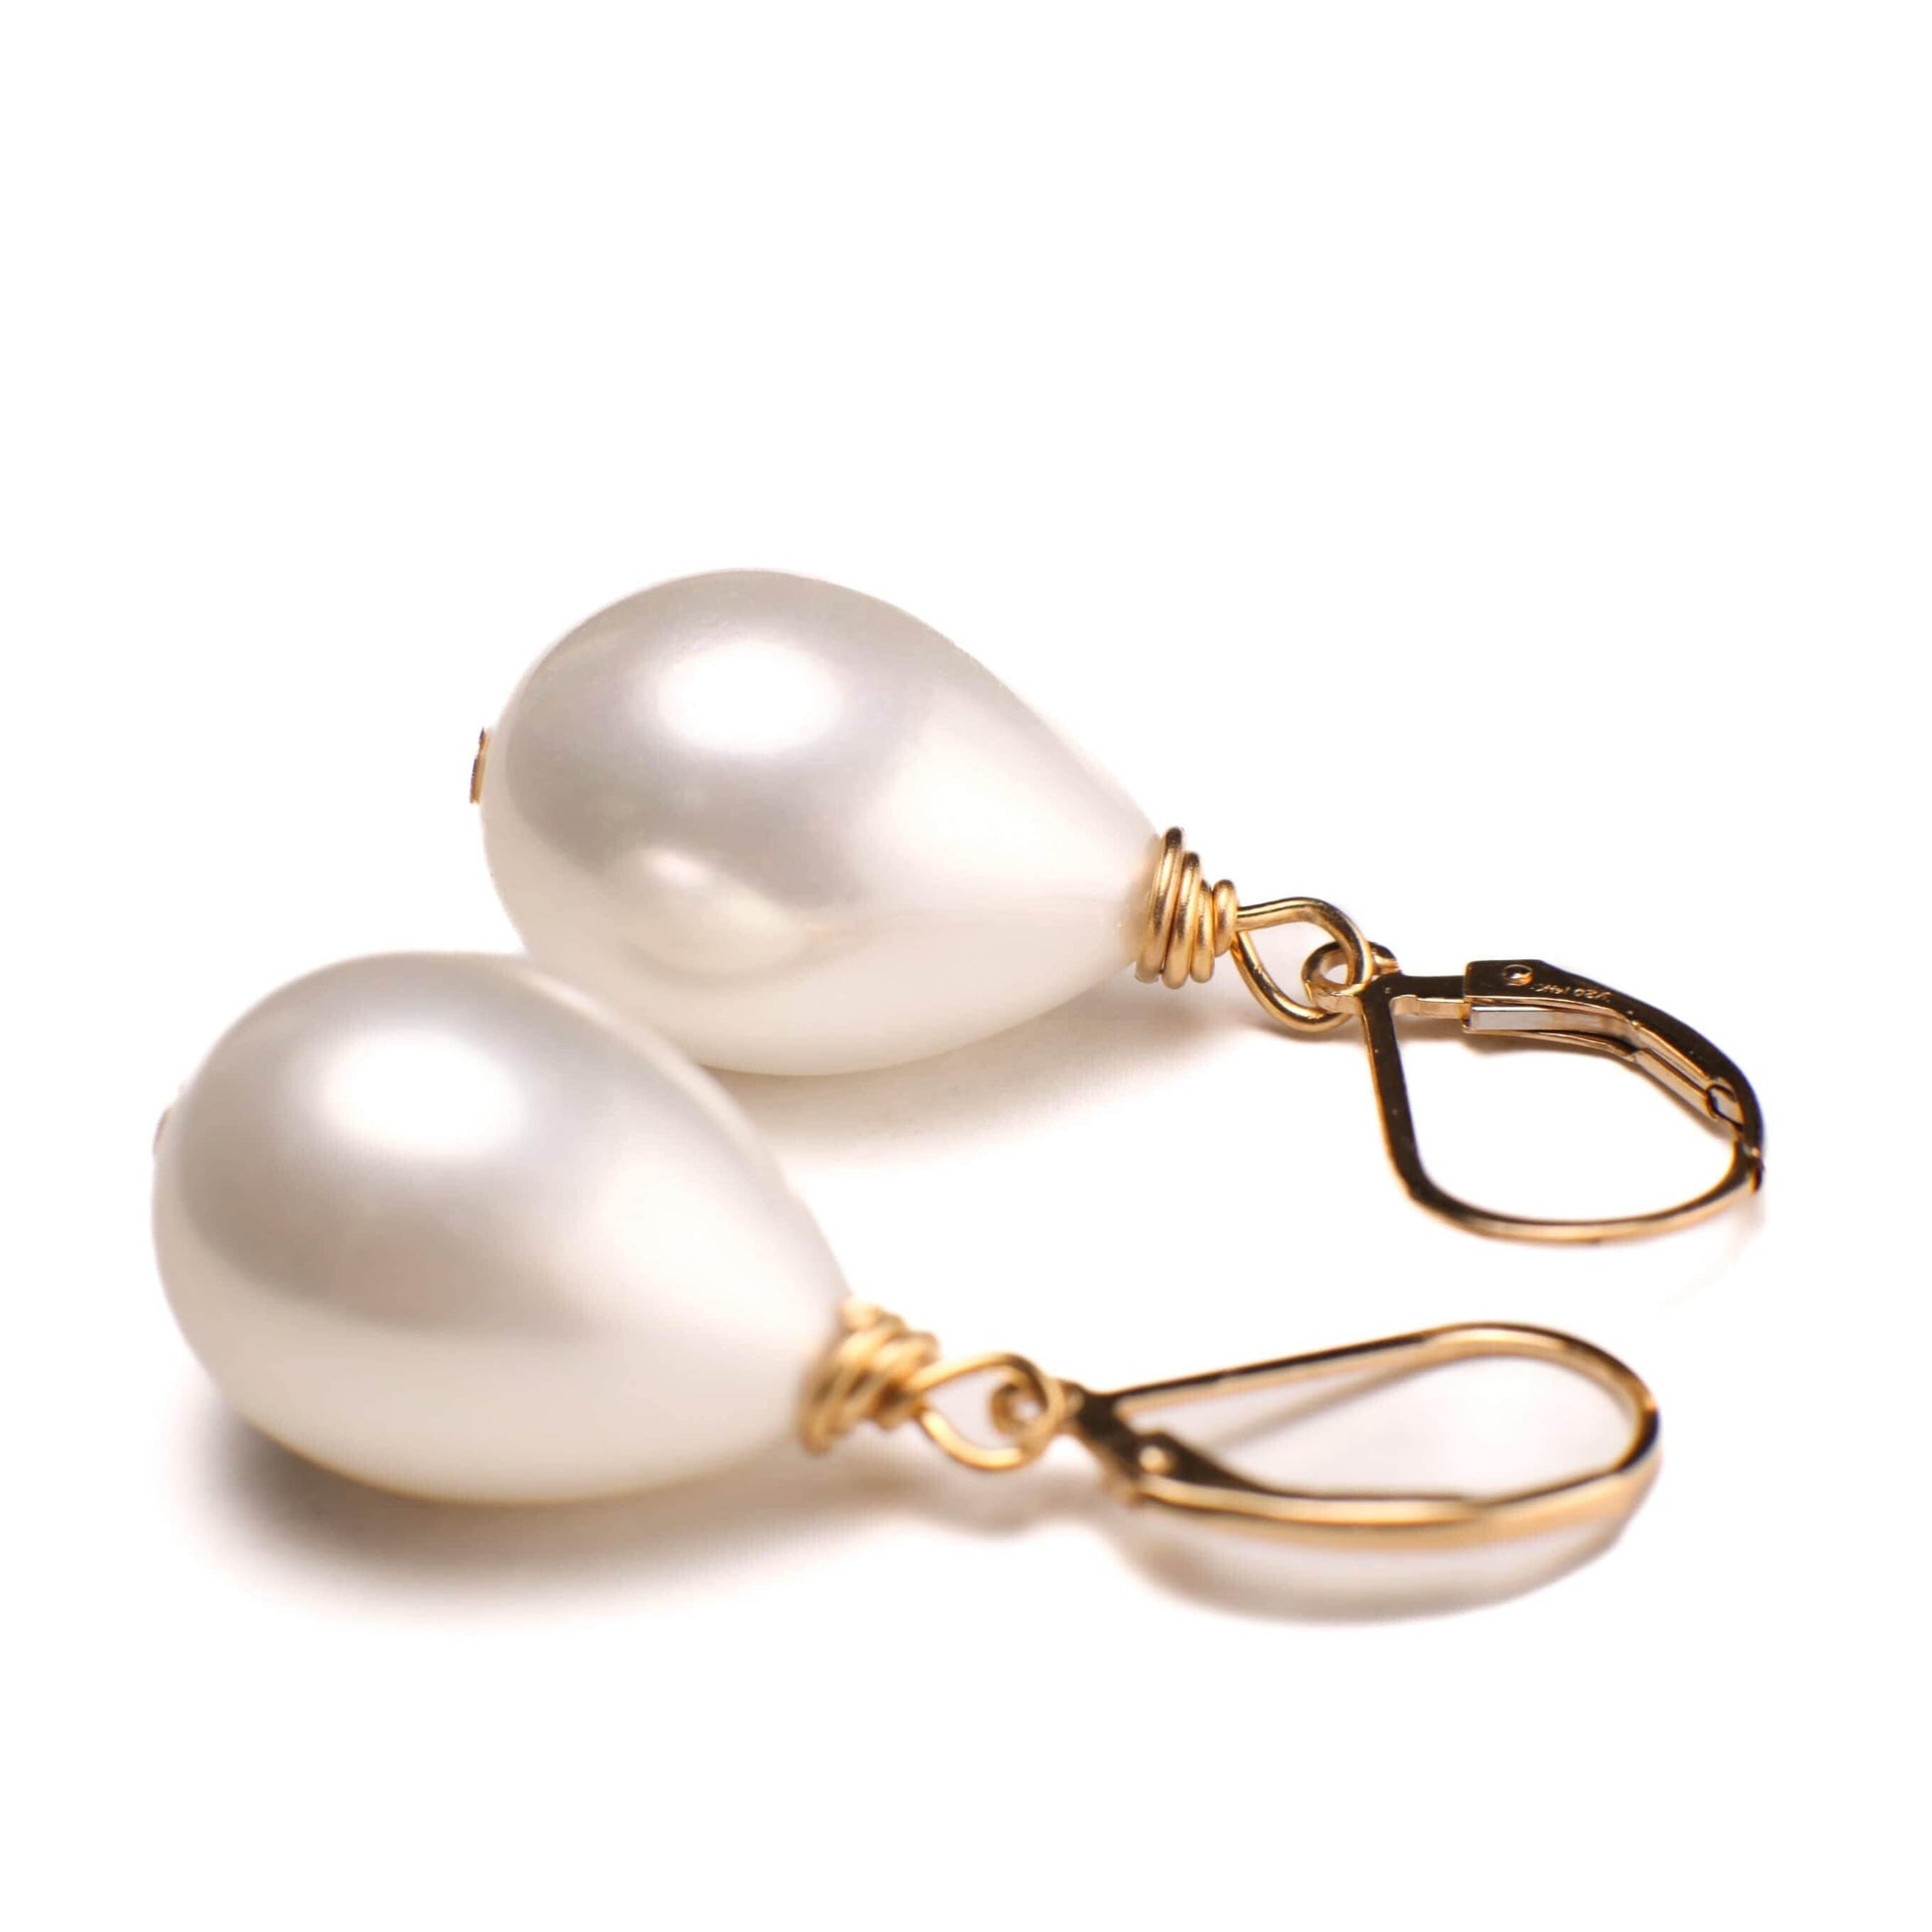 White South SeaShell Pearl drop 14x20mm Large High Luster Briolette 925 Sterling Silver,14k Gold Filled Leverback Earrings, Elegant ,Bridal.